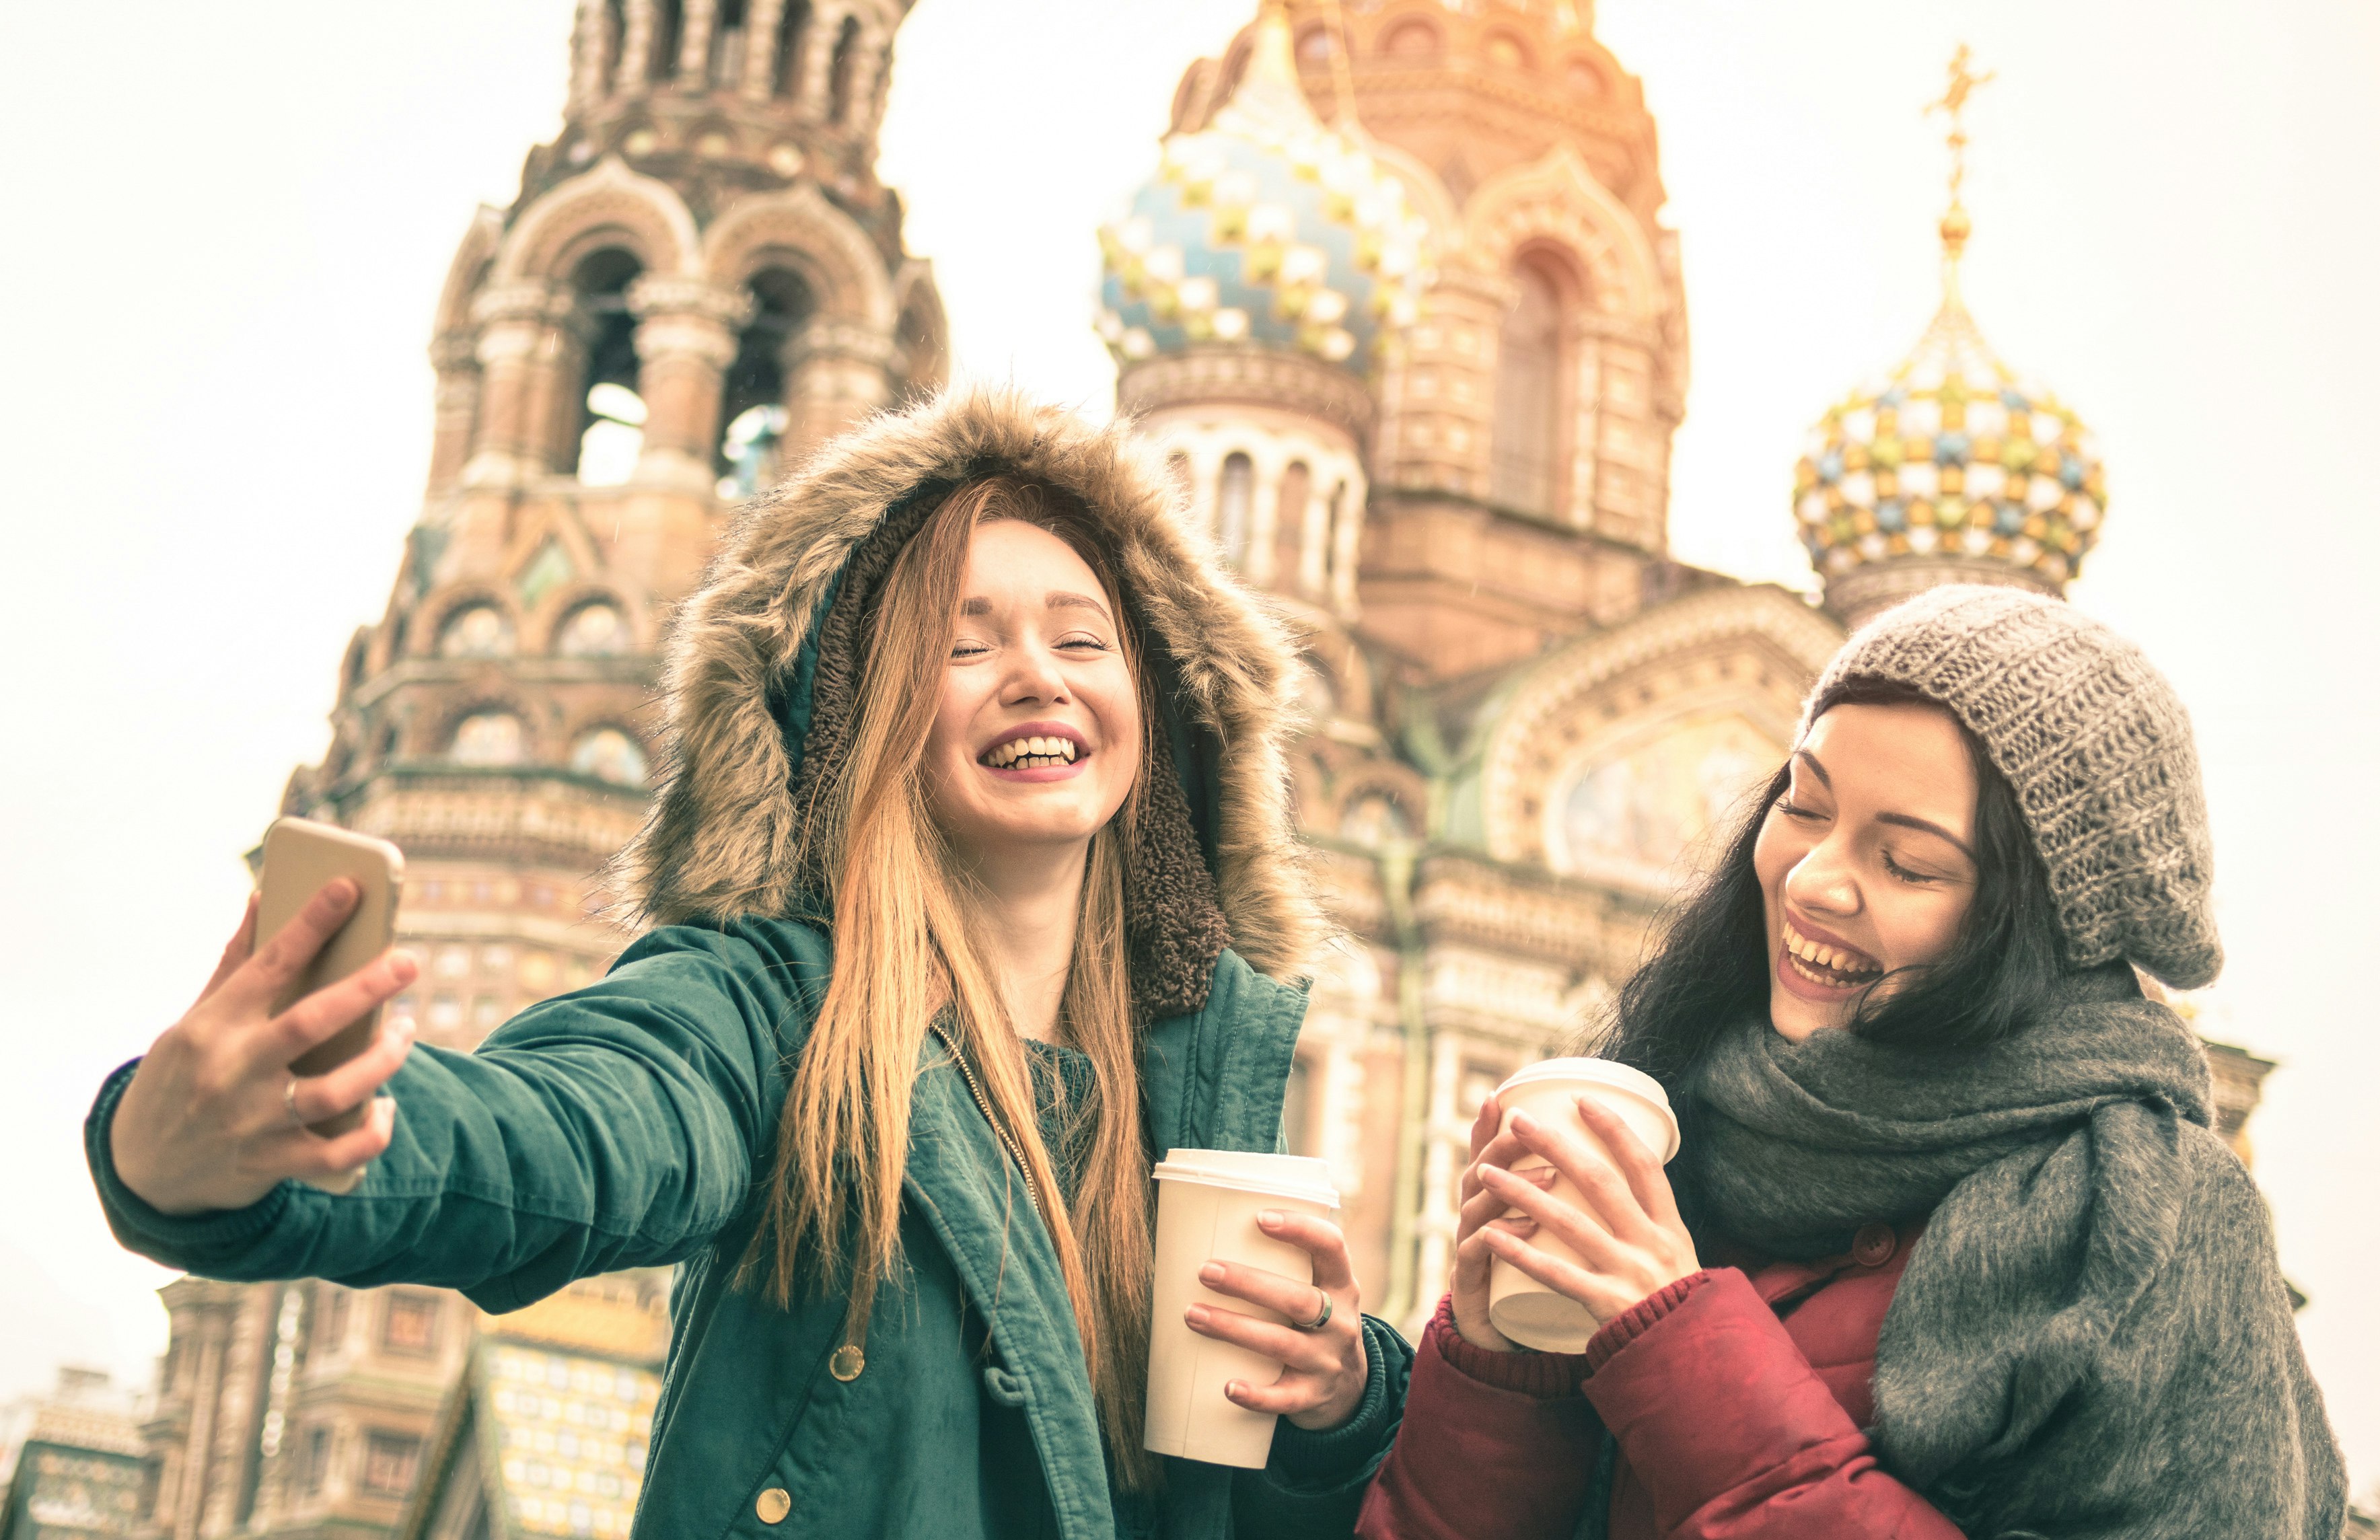 Two laughing girls take a winter selfie outside a church in Saint Petersburg.